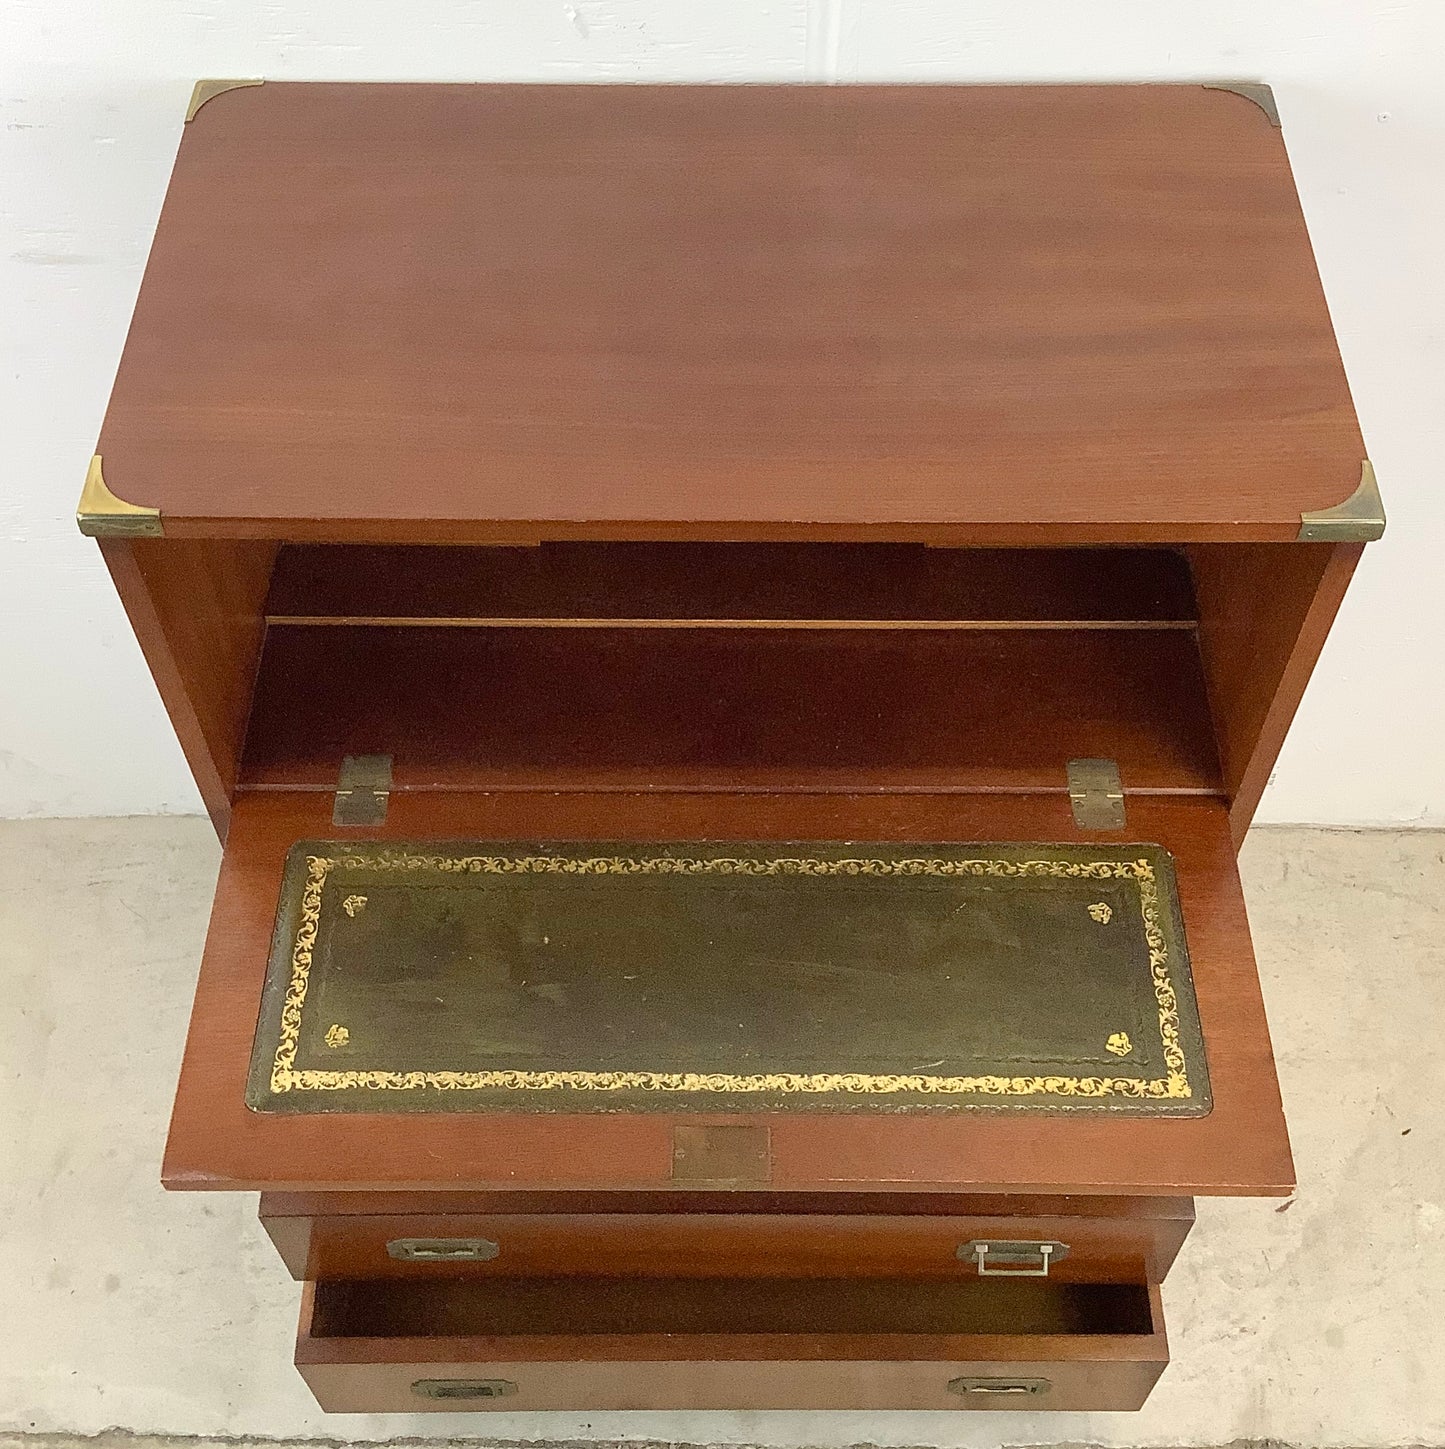 Vintage Campaign Dresser With Drop Front Desk by Doherty